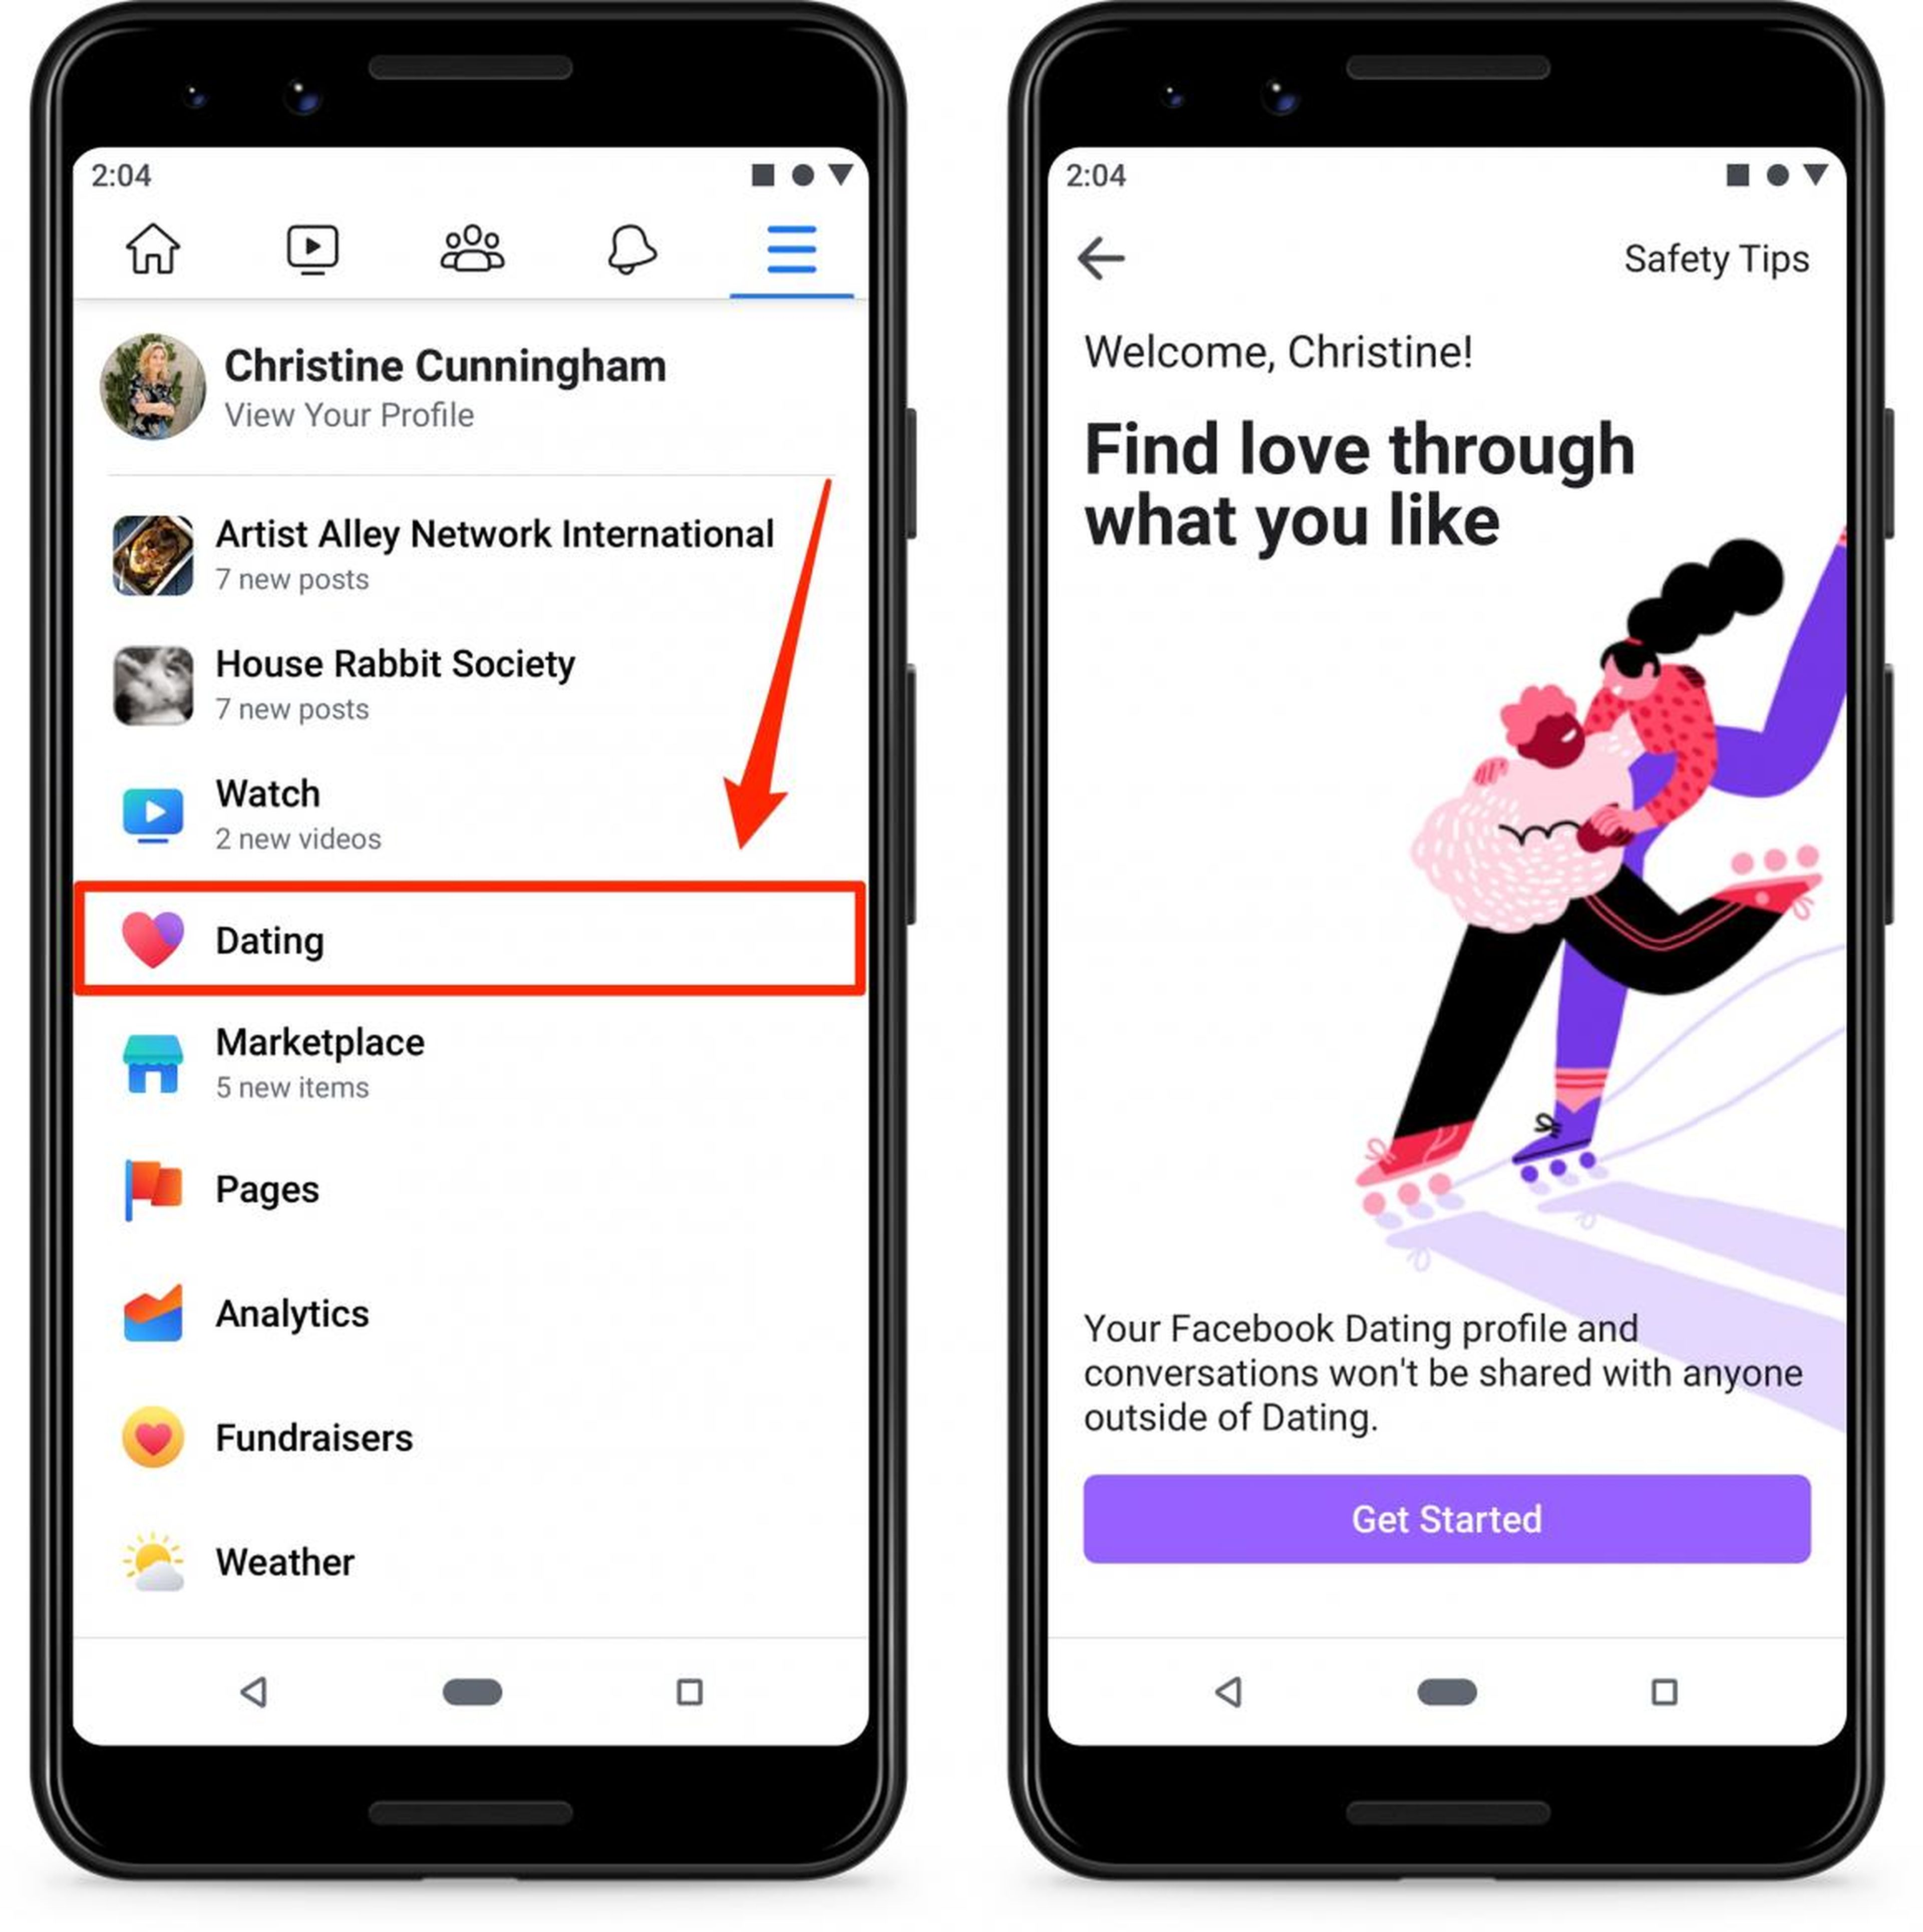 One of the biggest advantages to Facebook Dating may be that the service exists inside of the Facebook app, and can be accessed from the app's main menu. It's about as easy as can be to swipe between your news feed any any